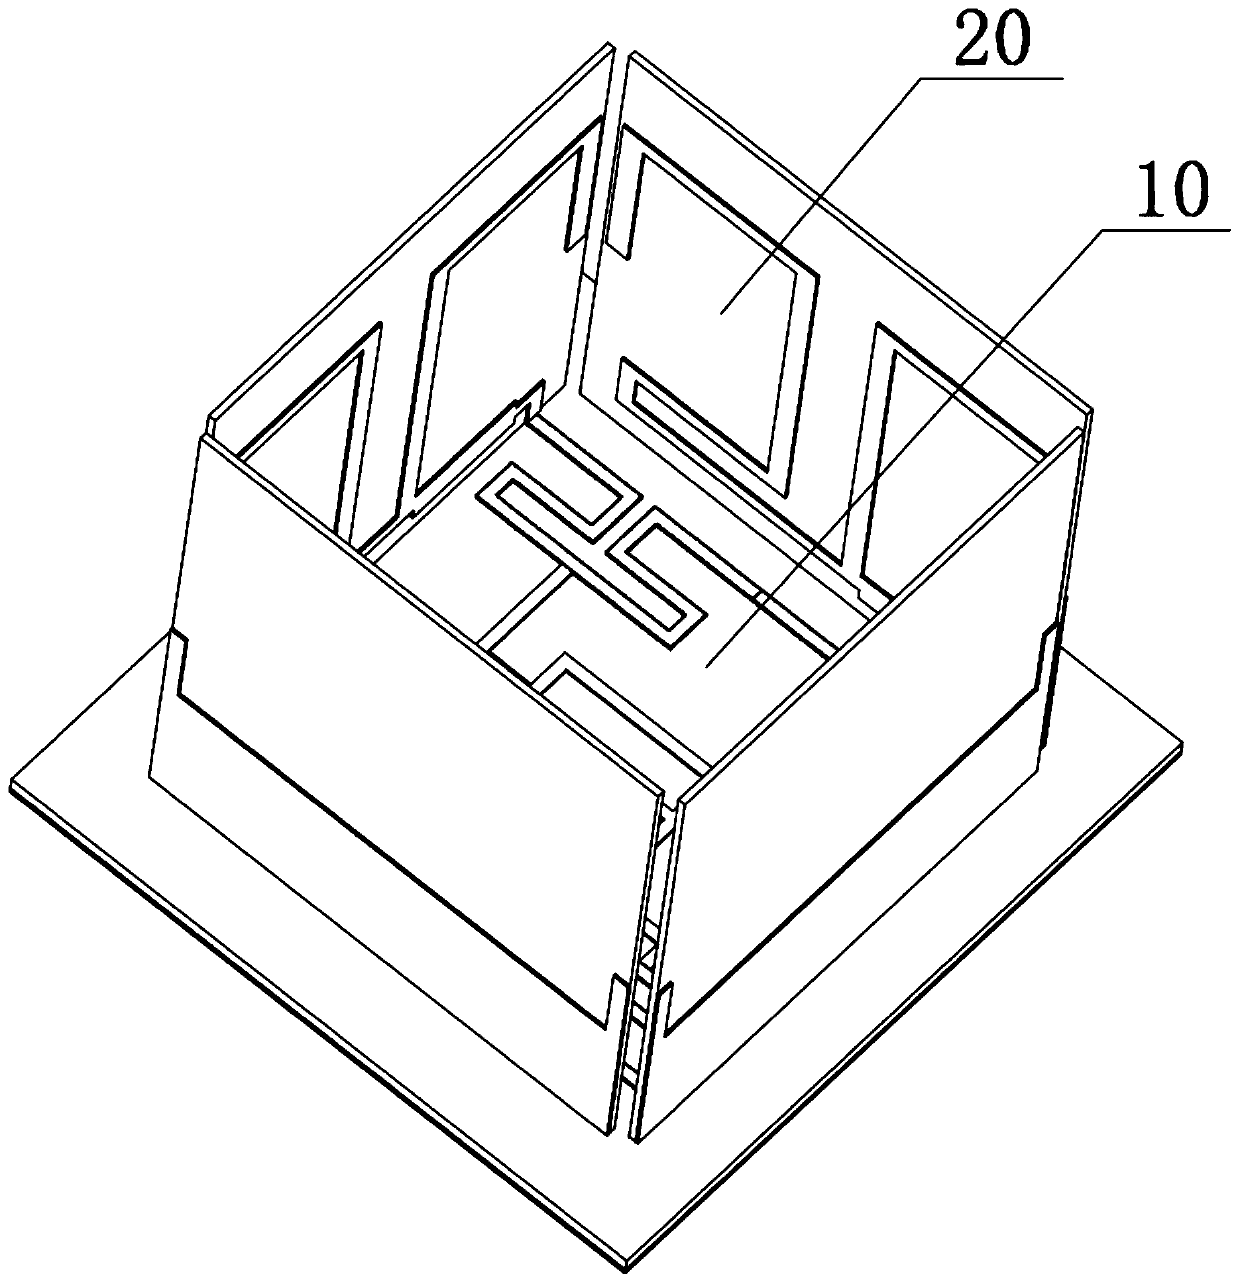 An RFID system reader antenna for fitting rooms based on miniaturization technology